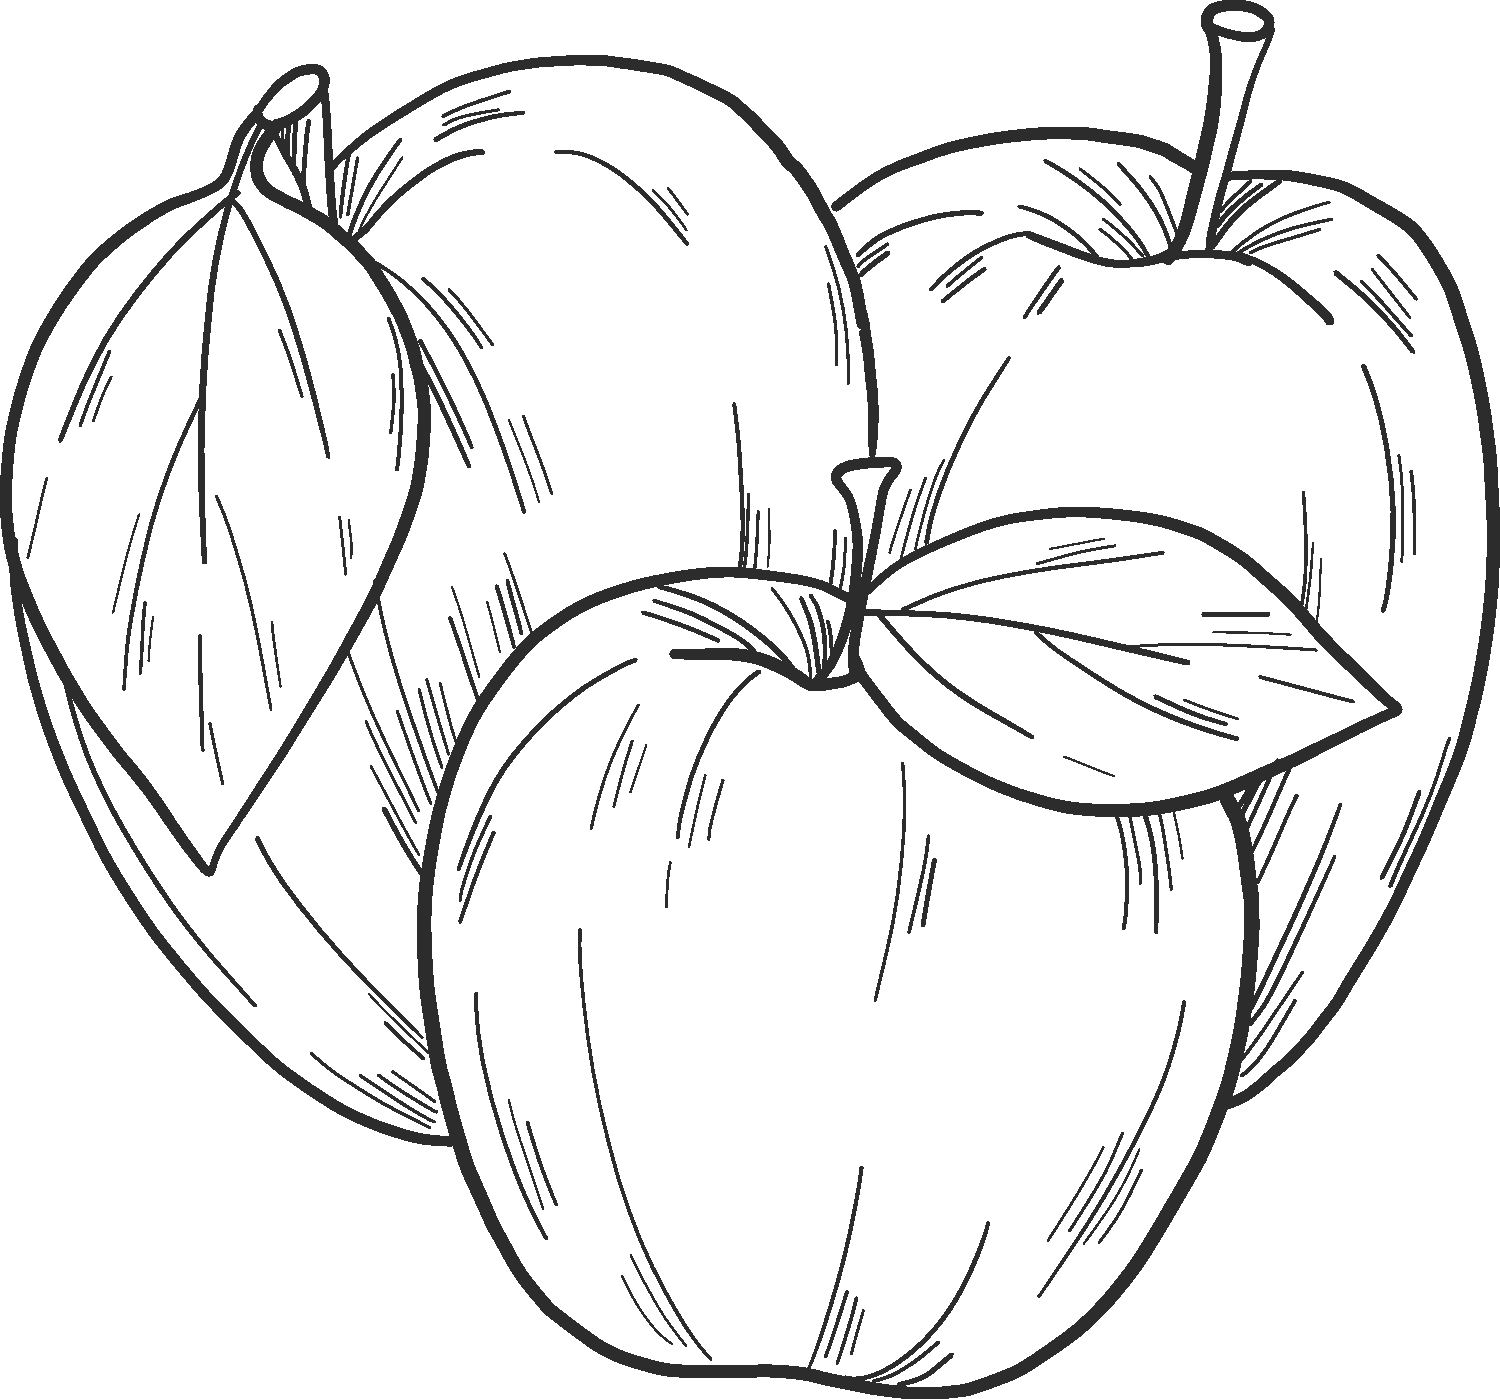 Apple 11  coloring page to print and coloring